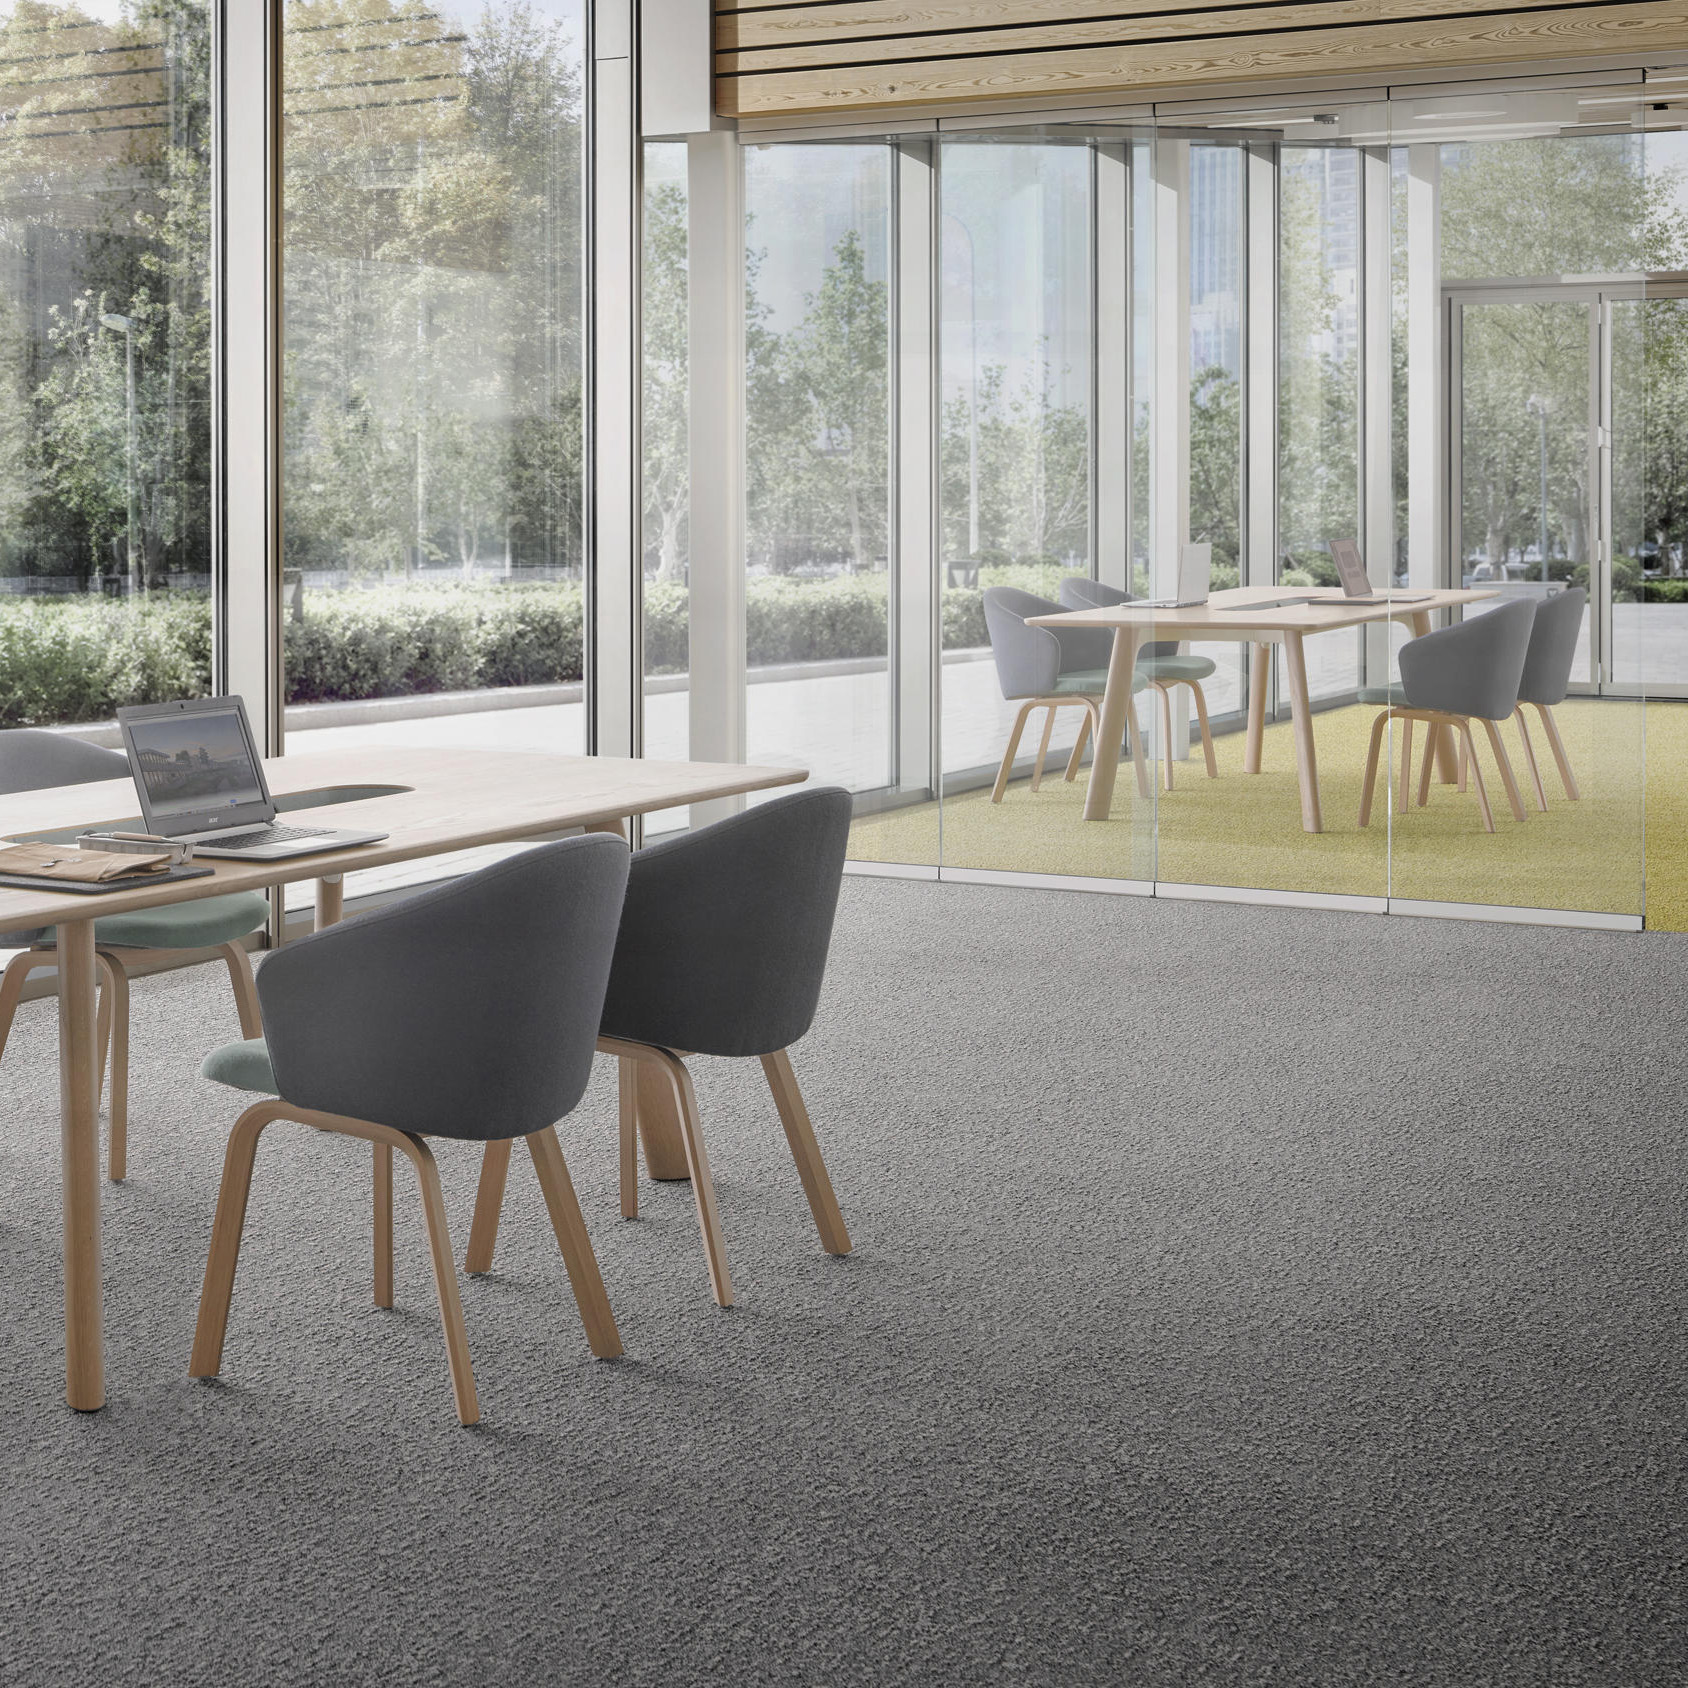 Desso Airmaster Earth used in modern commercial office space with earth tones